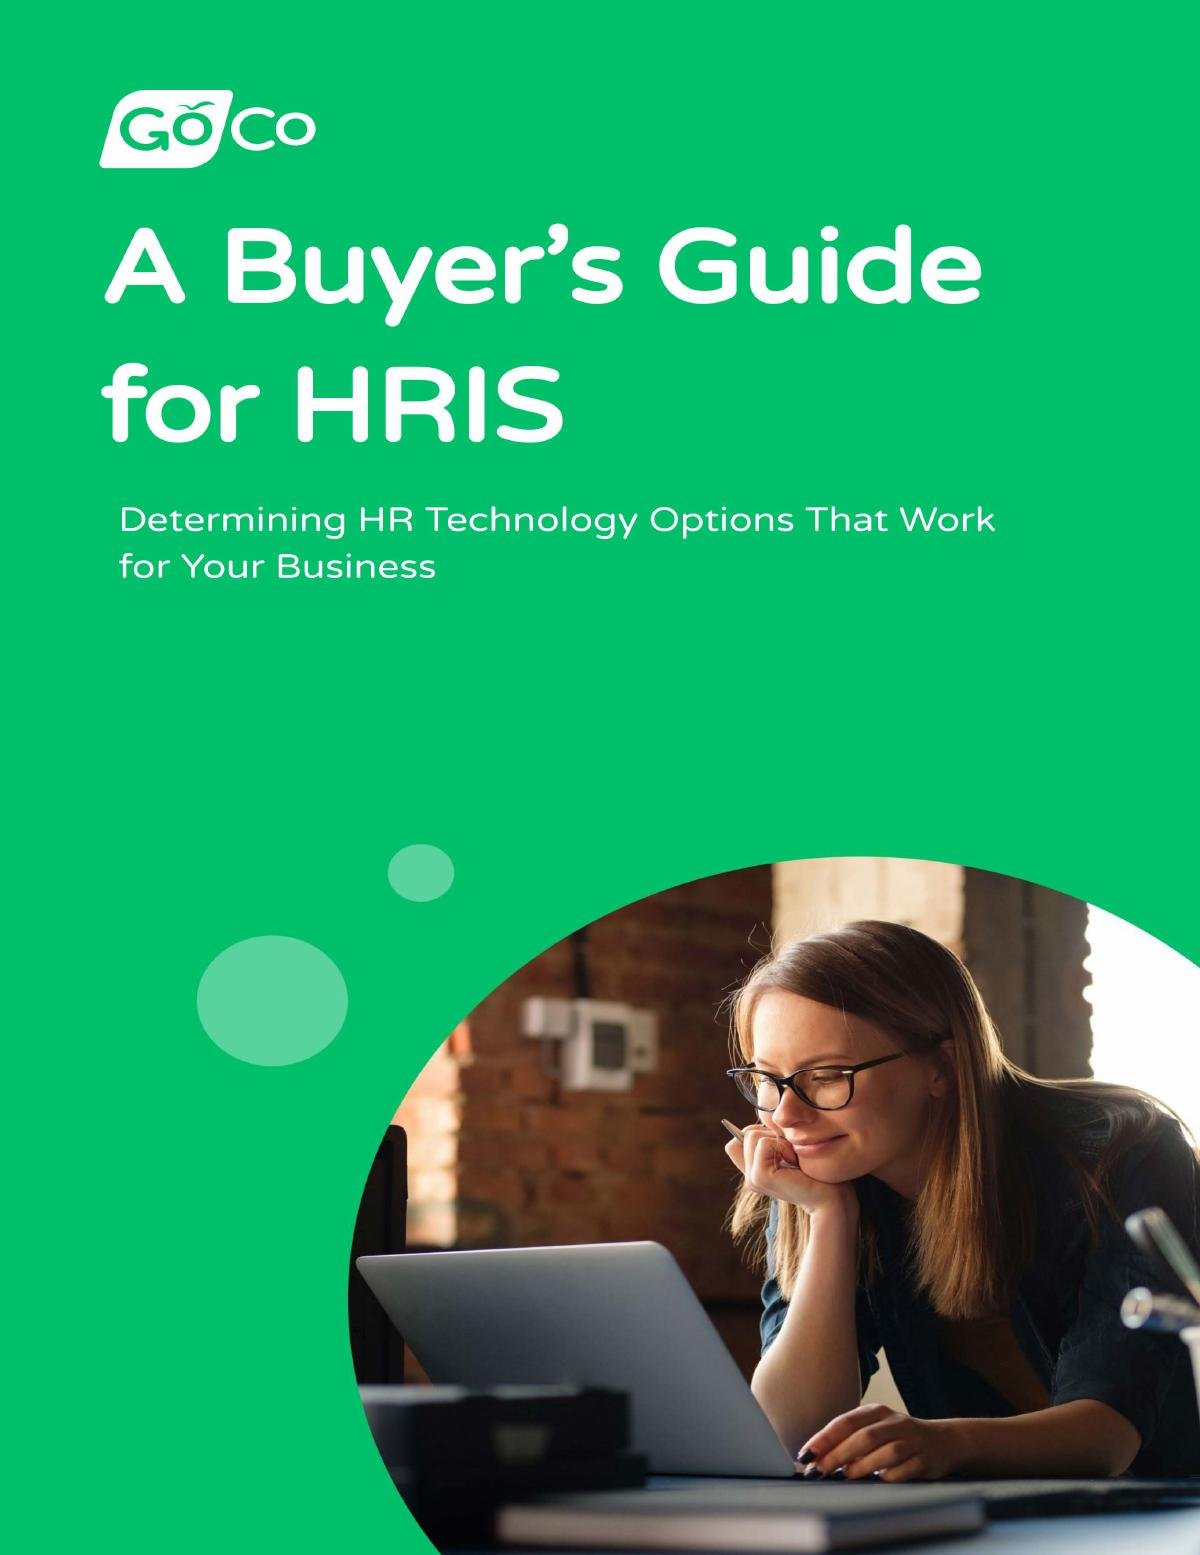 A Buyer's Guide for HRIS